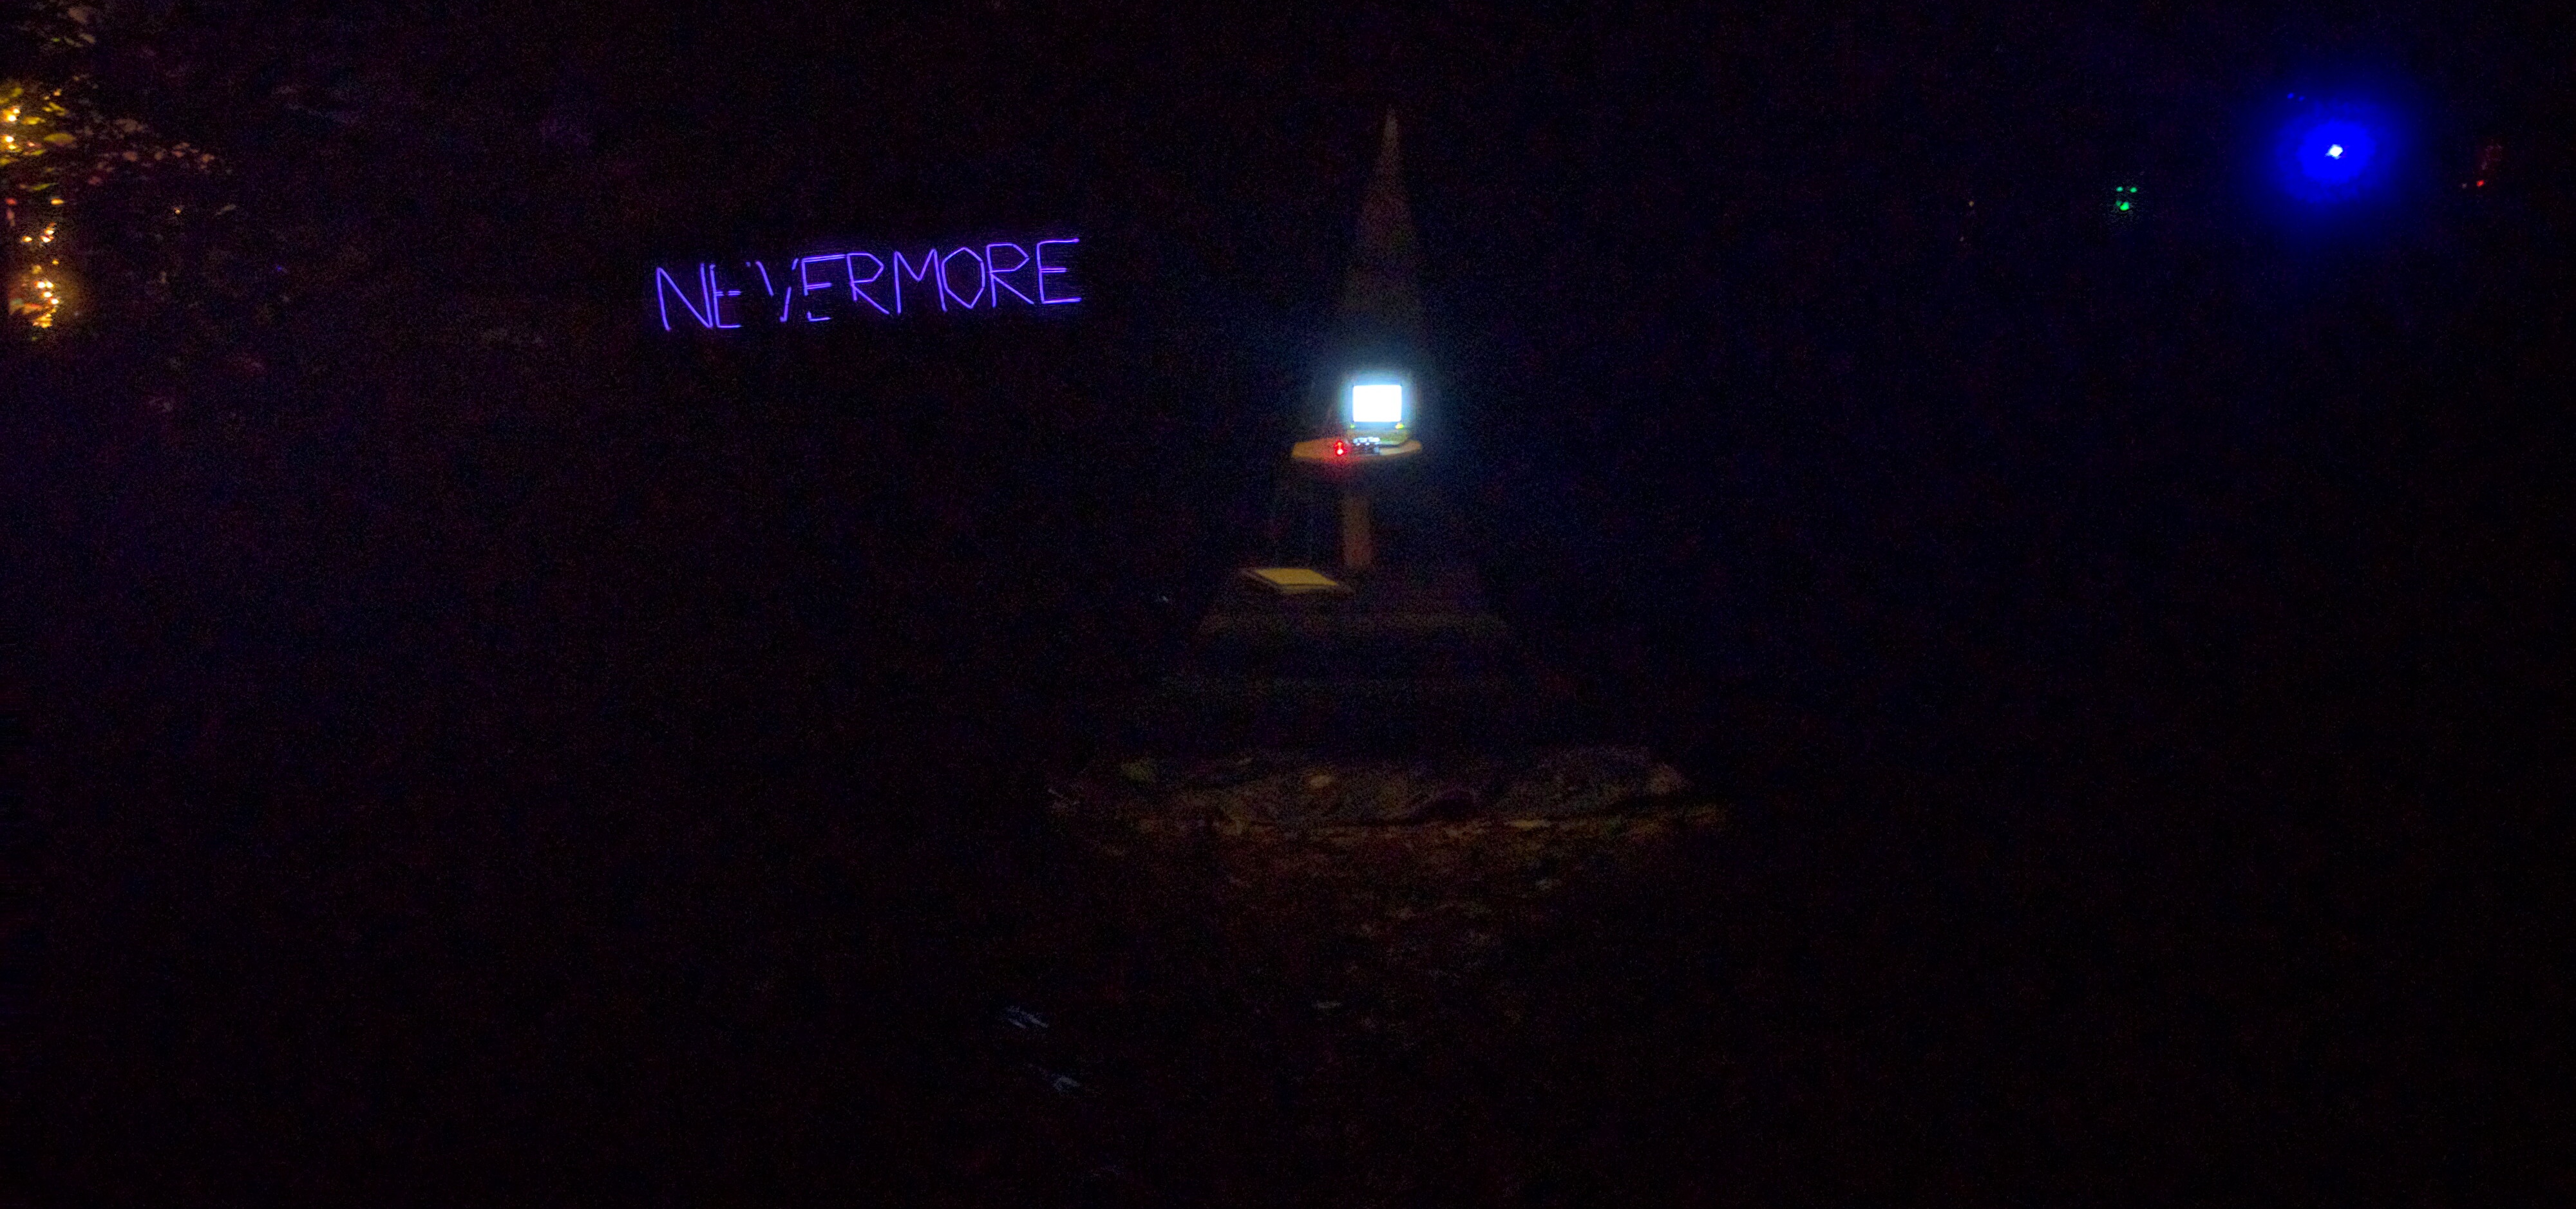 Image of Nevermore at night